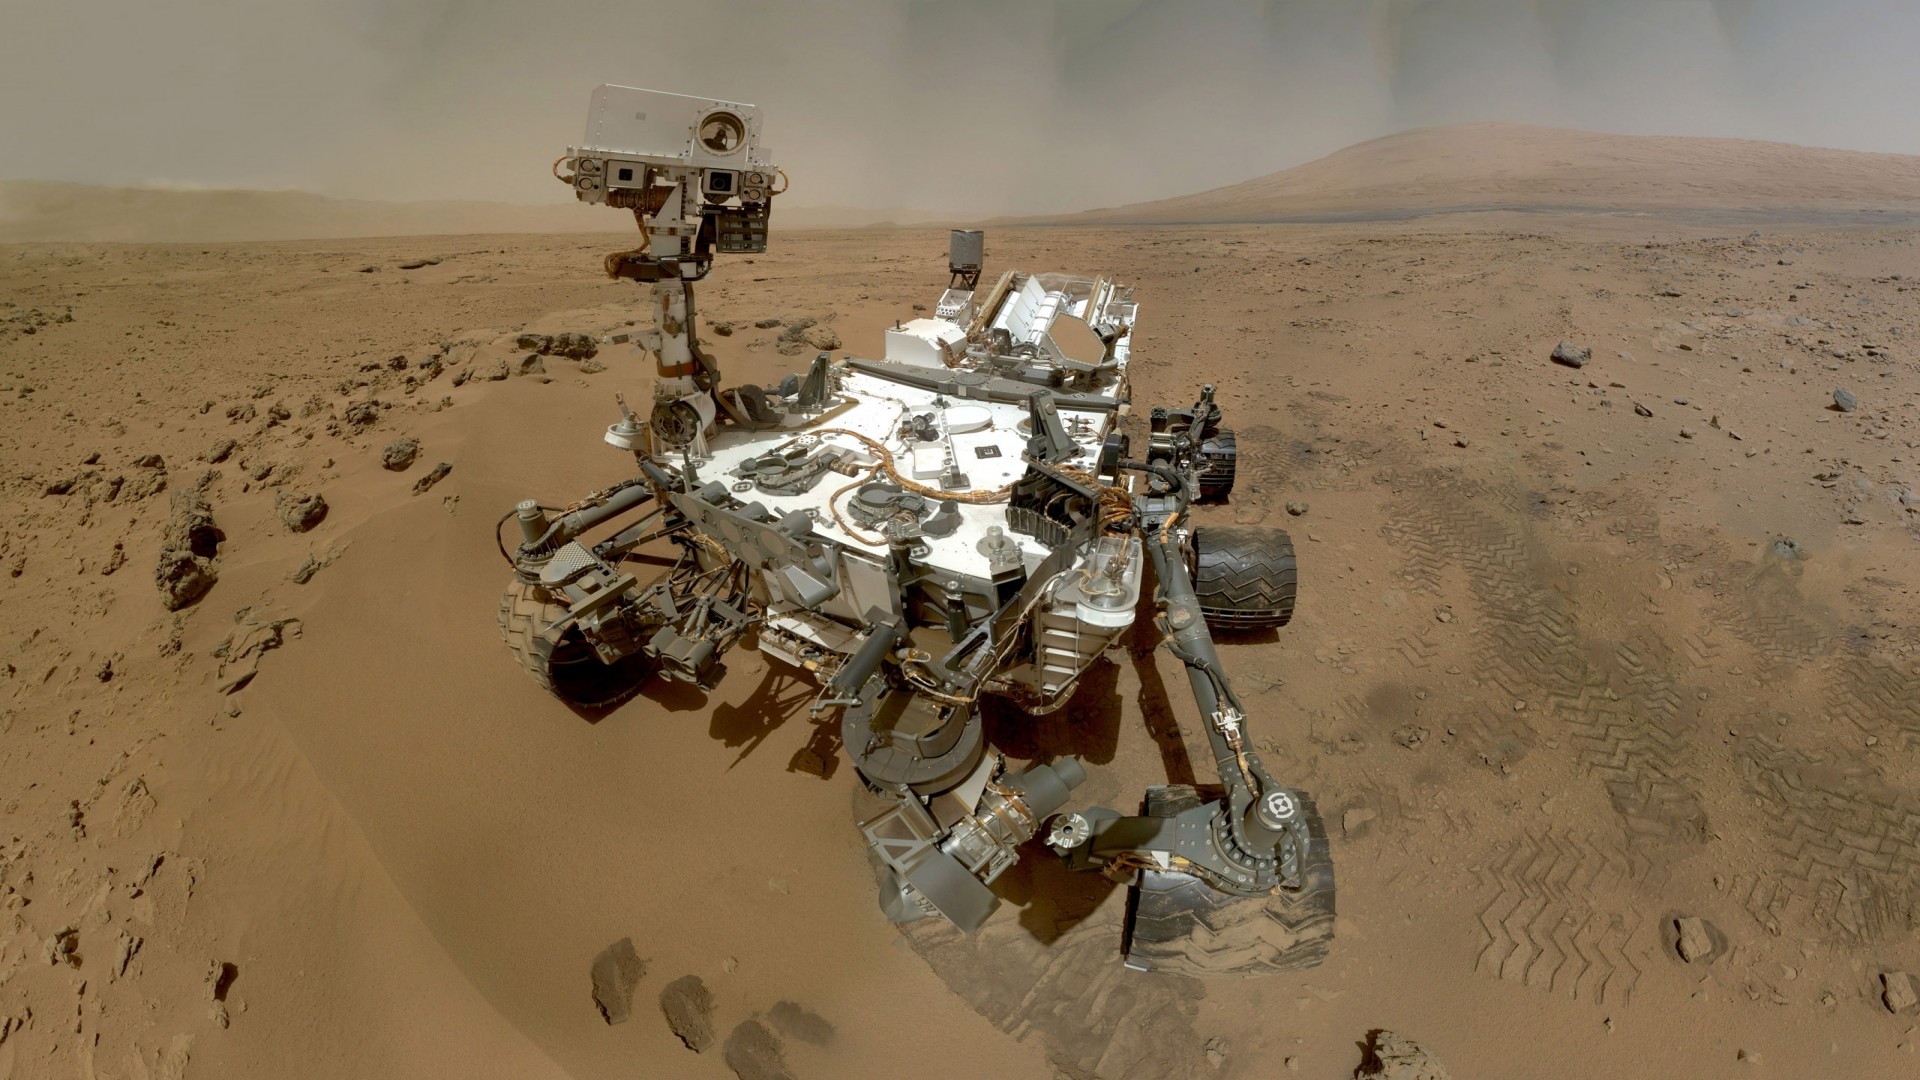 1920x1080 Wide HDQ Curiosity Wallpapers, Fantastic Wallpapers | GuoGuiyan Wallpapers